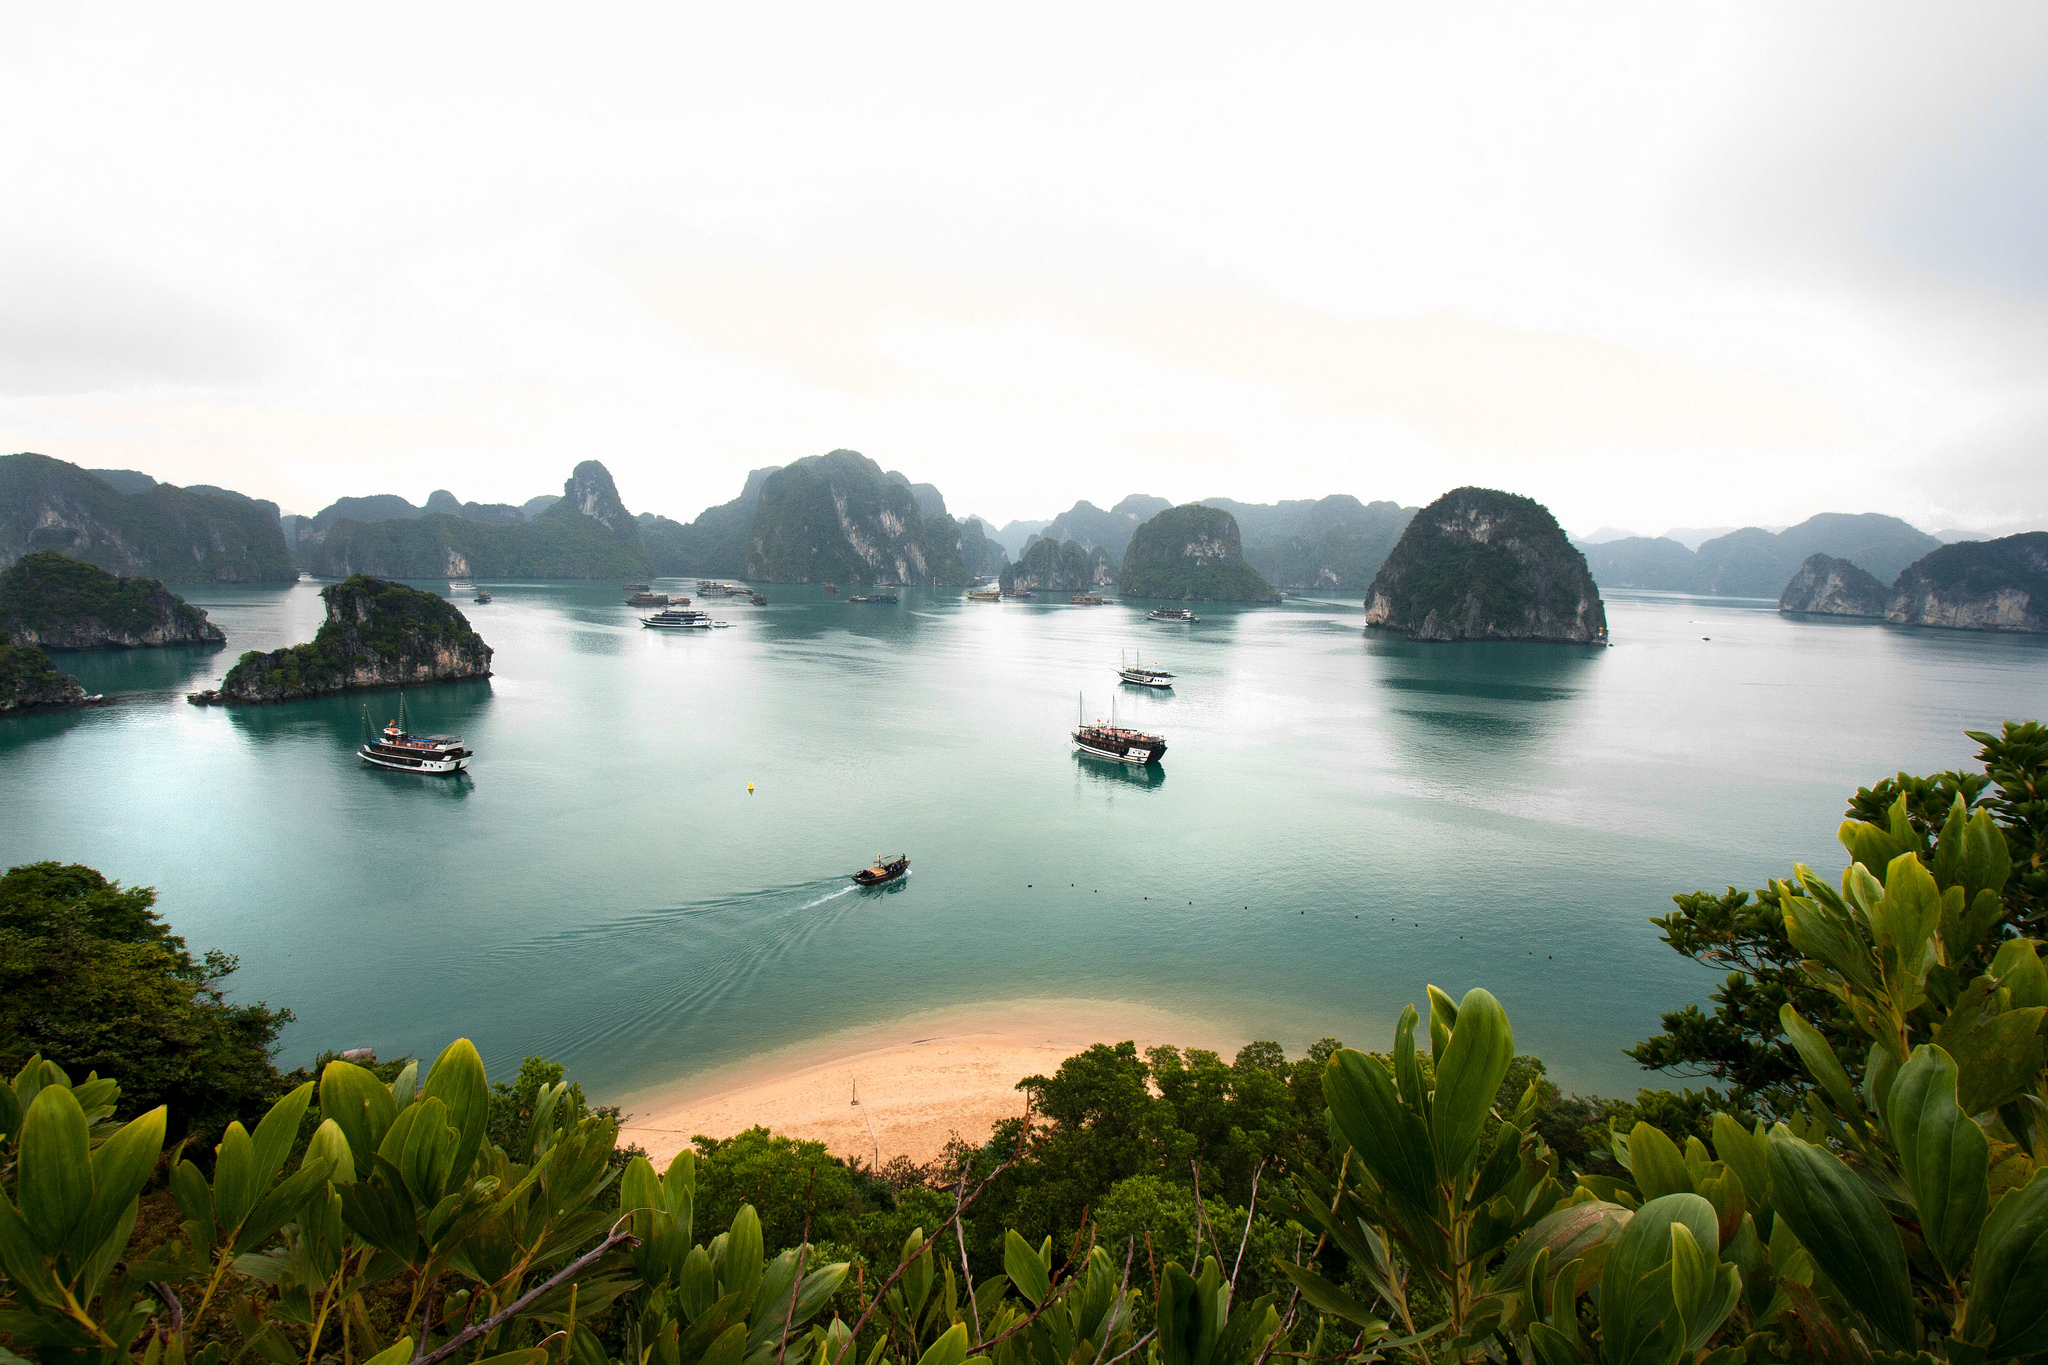 Halong Bay - Insight To Asia Tours